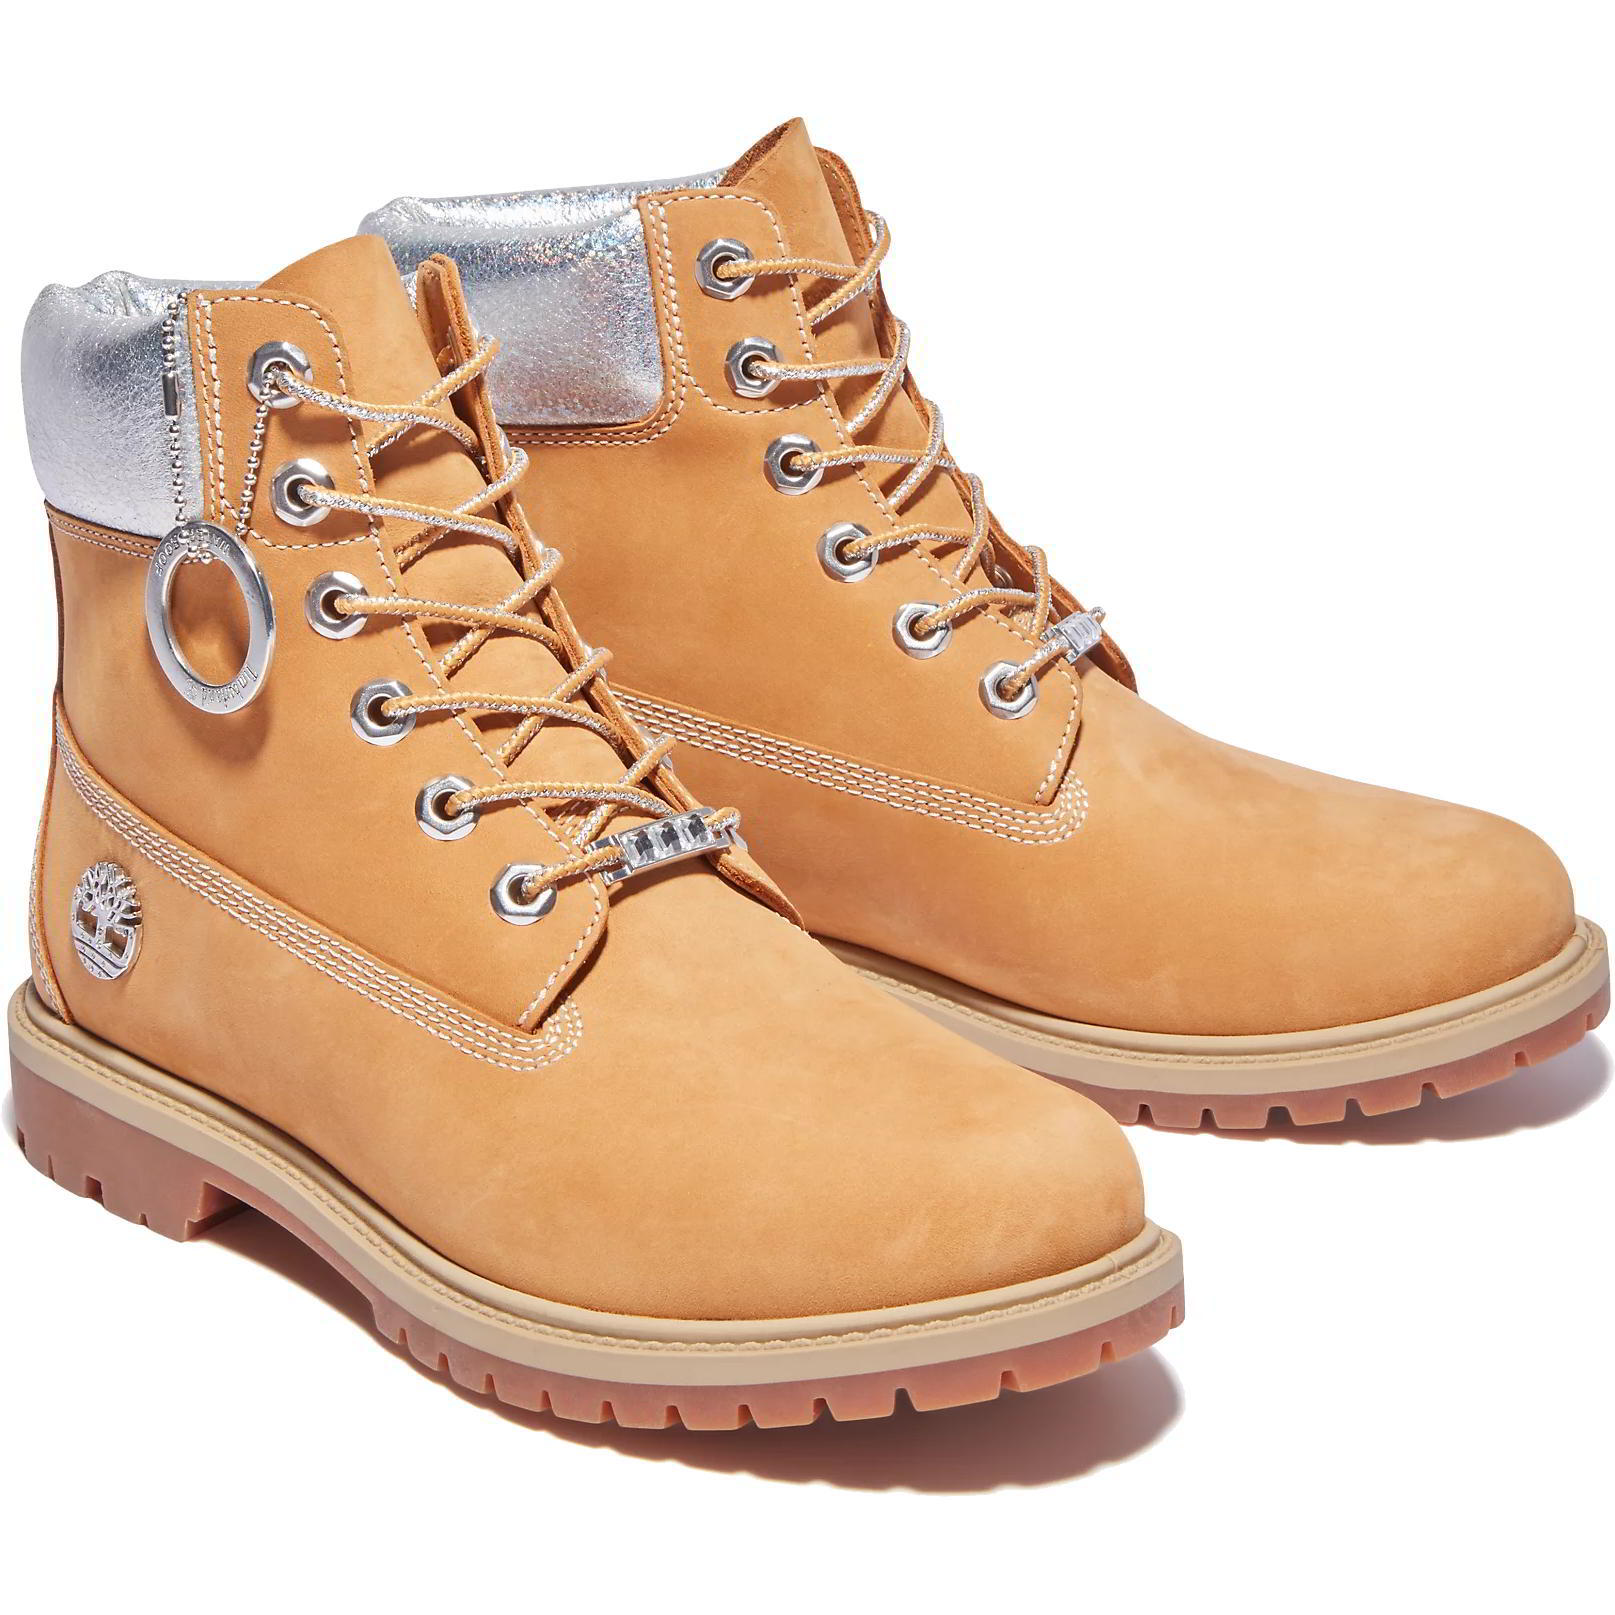 Timberland Womens Heritage 6 Inch Waterproof Boots - Wheat A2R1Z 2951